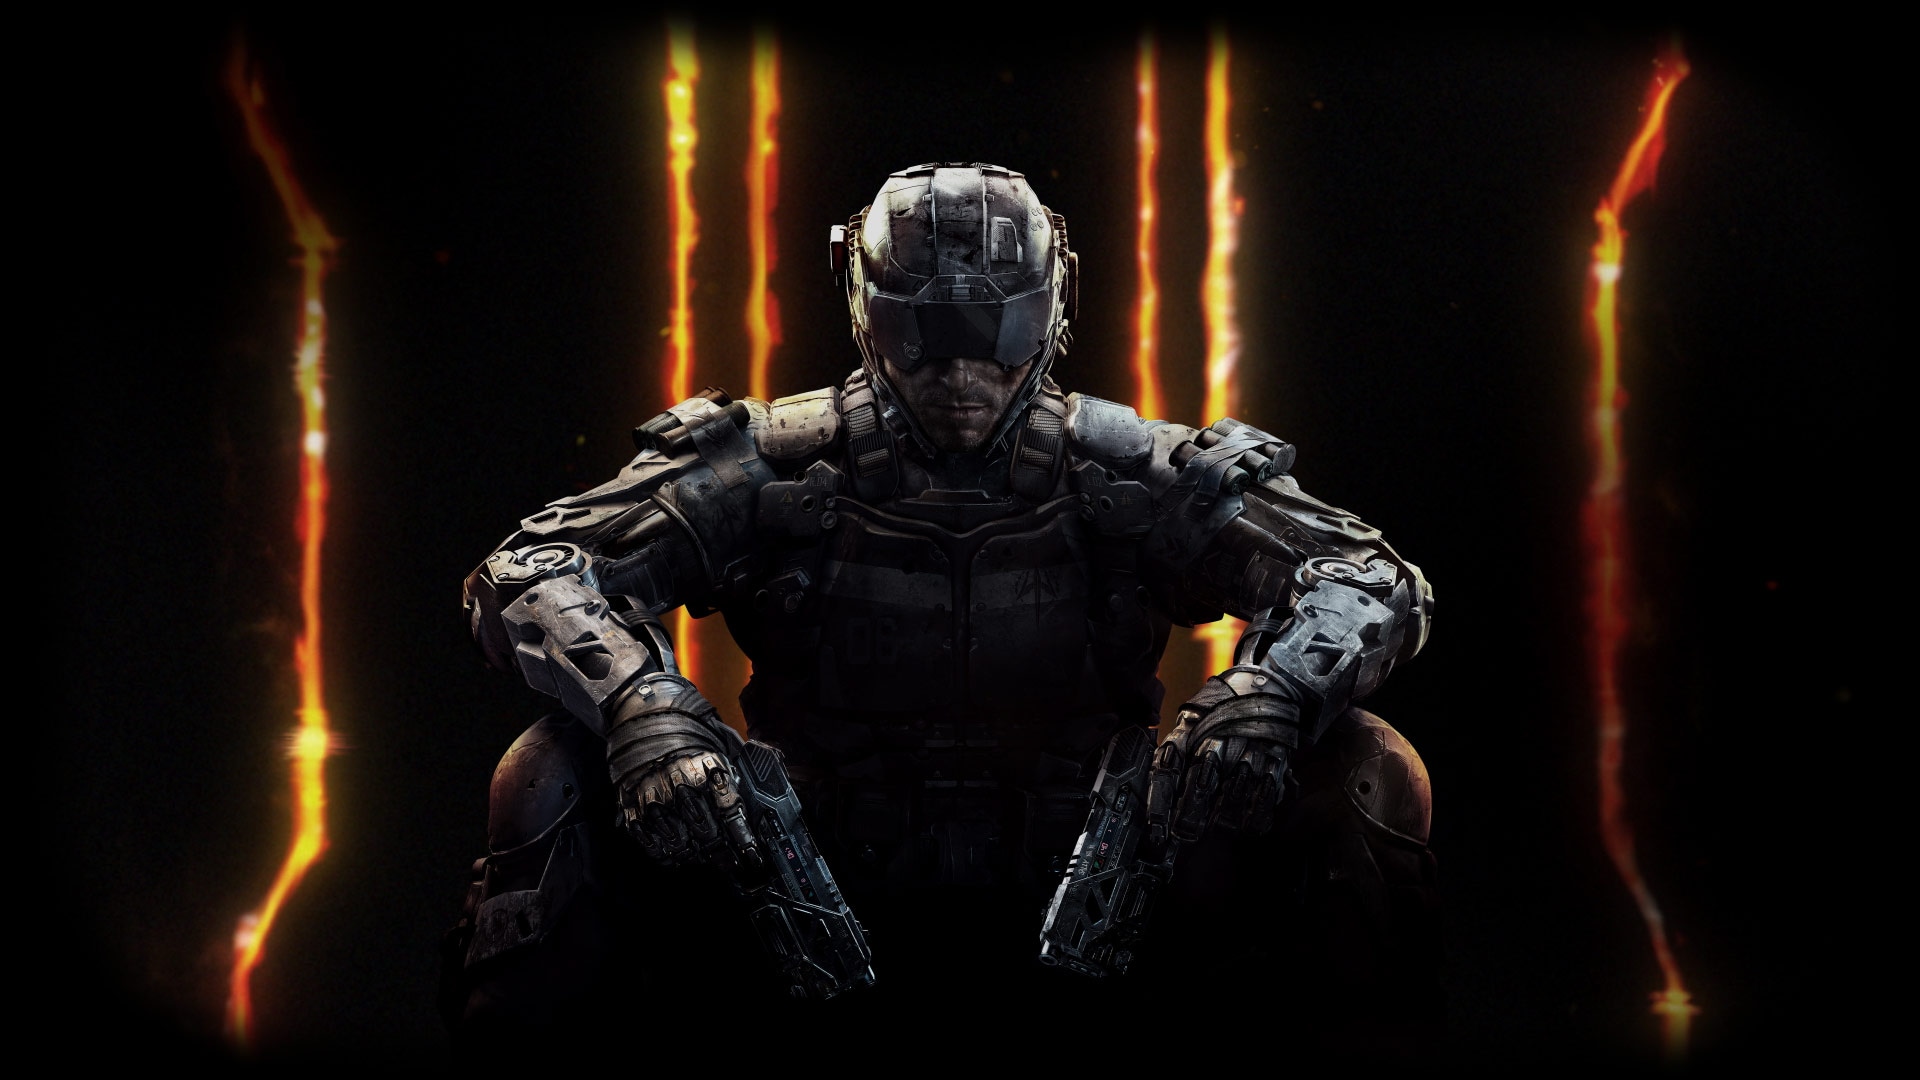 22 Call Of Duty Black Ops III HD Wallpapers Backgrounds   Wallpaper 1920x1080